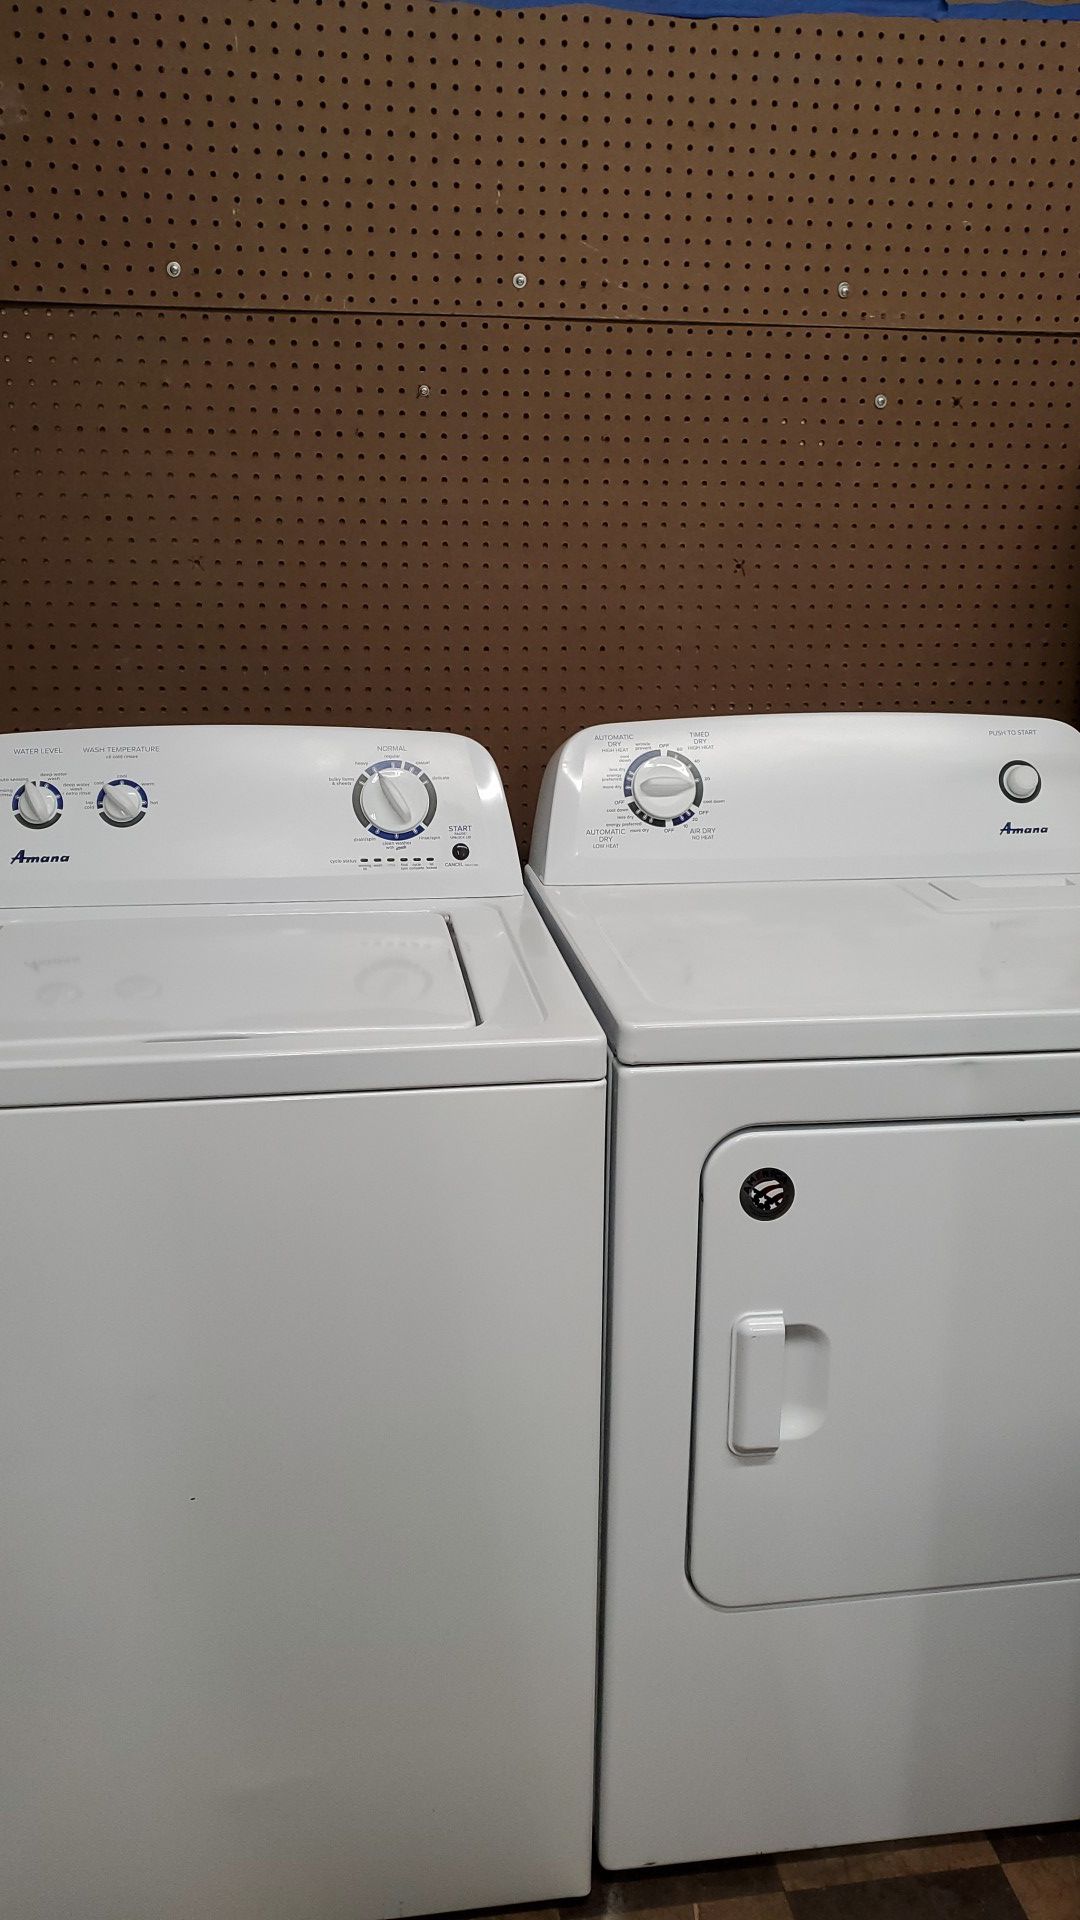 AMANA WASHER AND DRYER